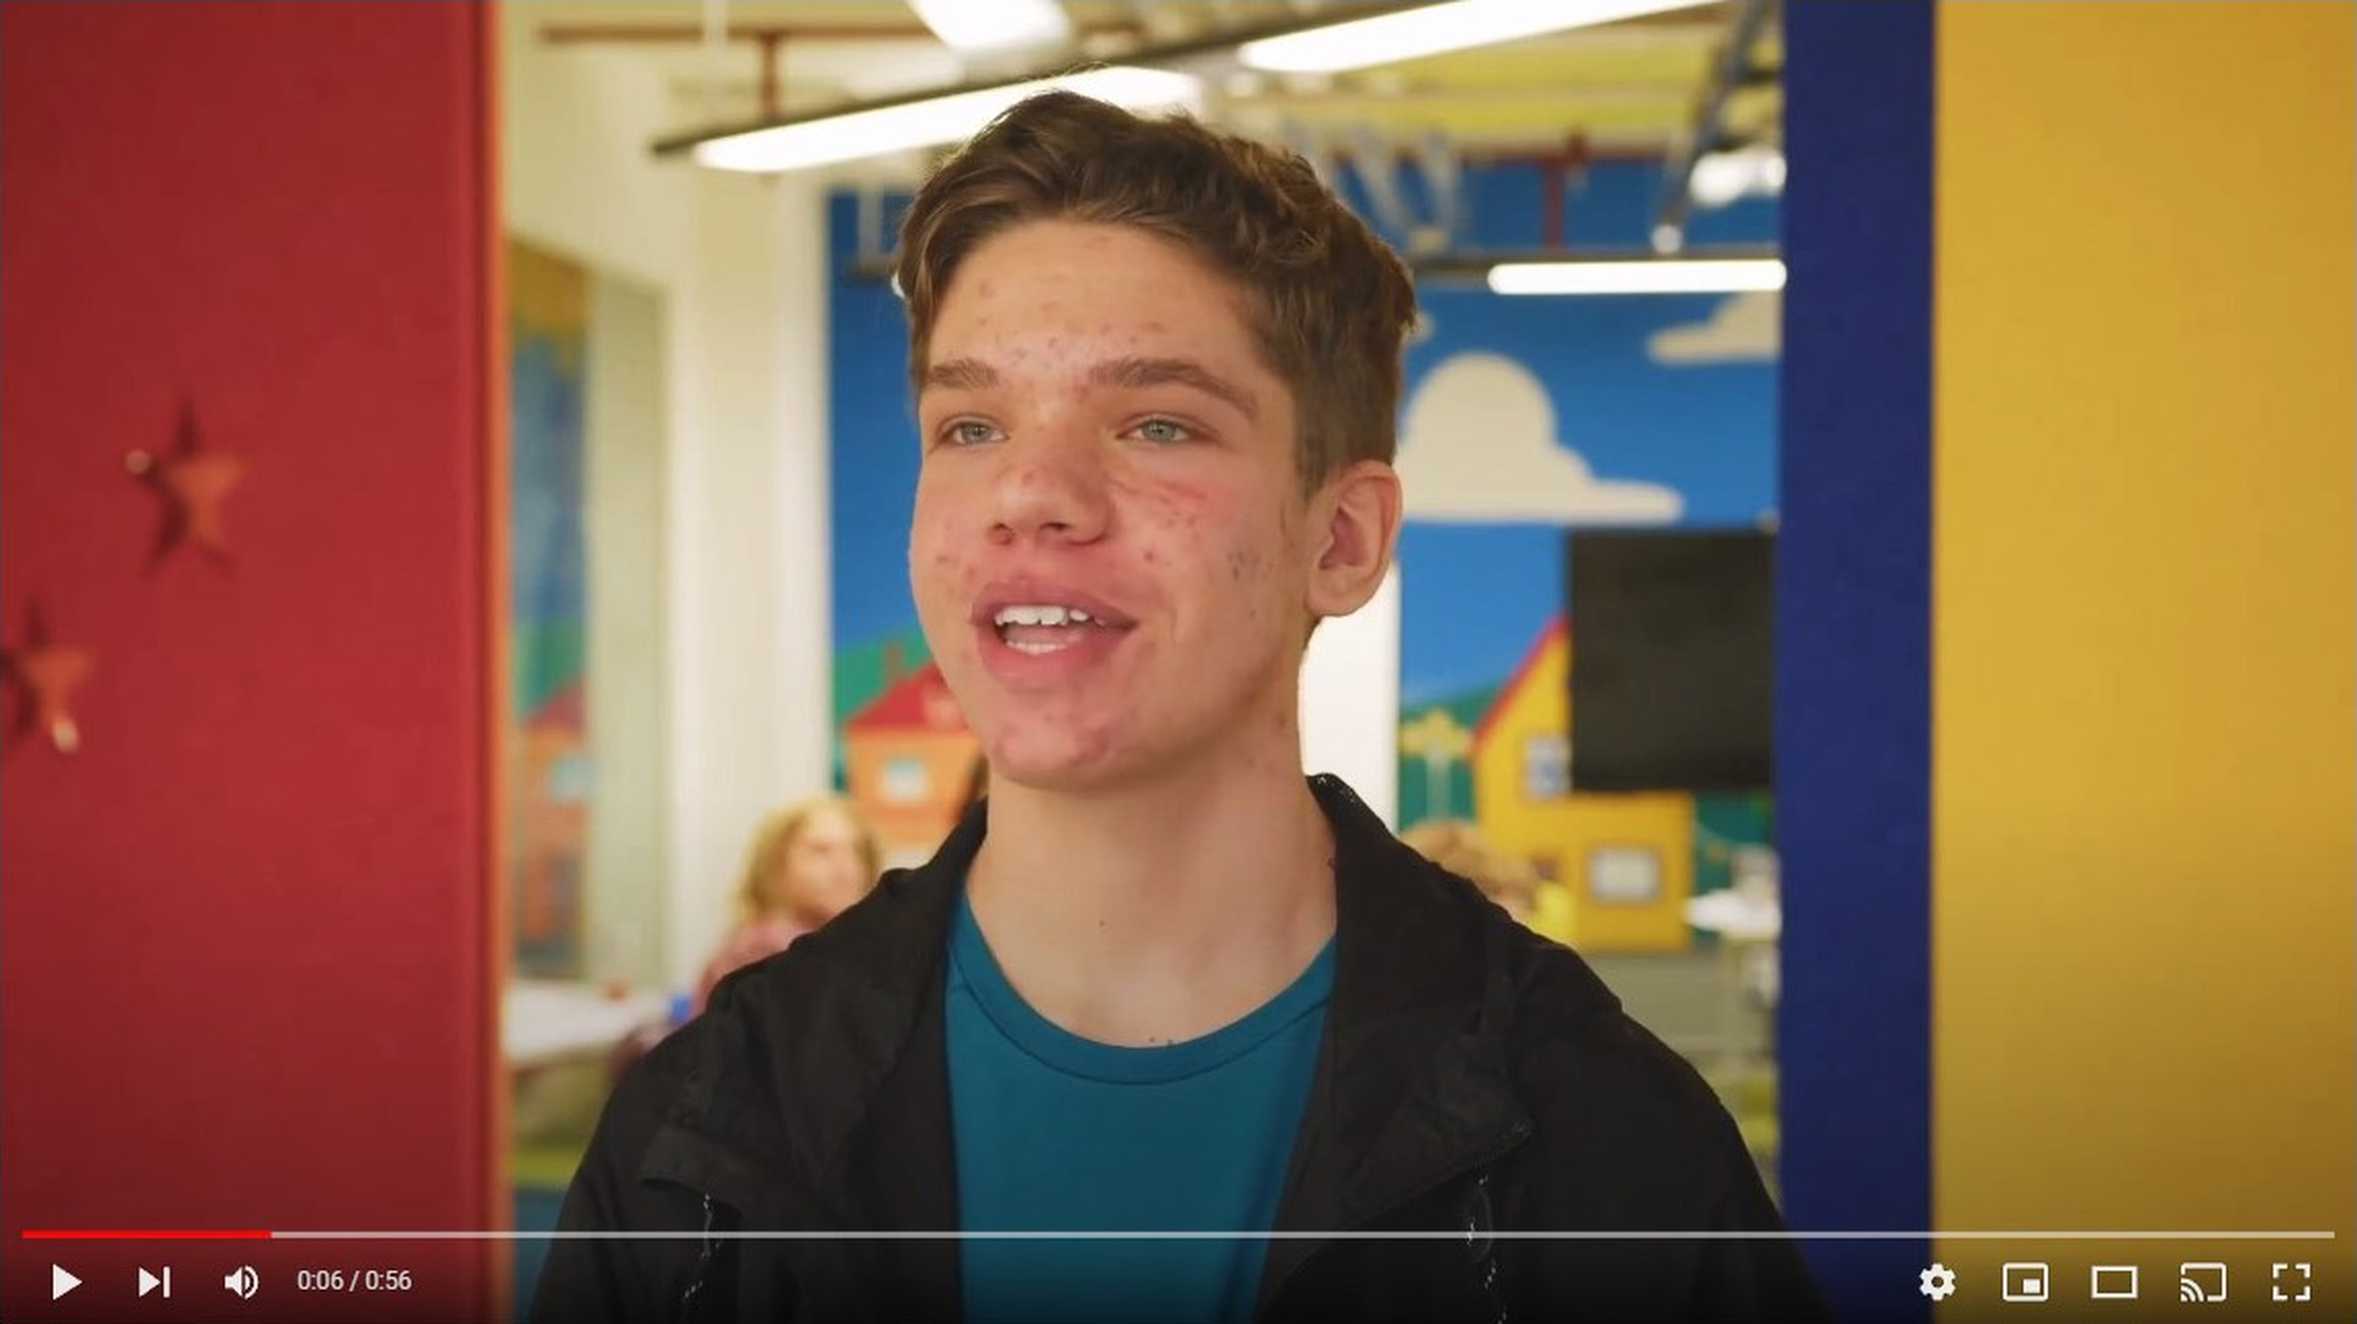 A still taken from an interview with STARboard member, Sam, conducted in the playground at Make-A-Wish UK's Reading hub.